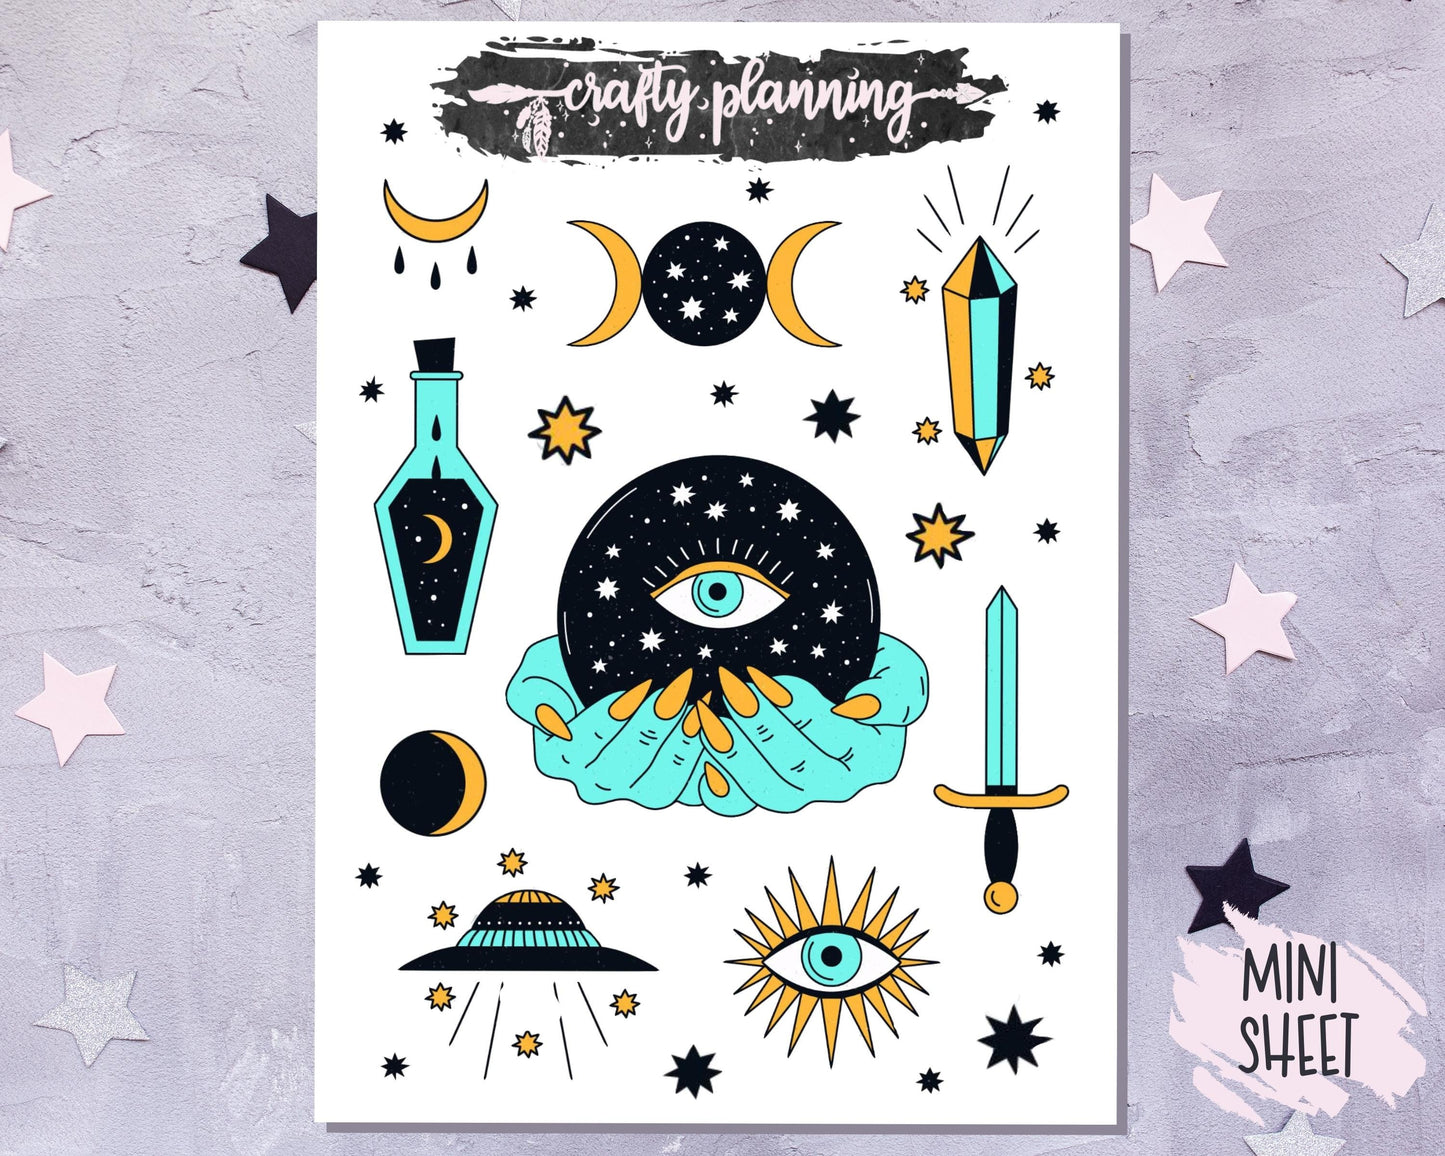 Witchcraft Stickers, Esoteric Stickers, Mystic Stickers, Occult Stickers, Planner Stickers, Deco Stickers, Journal Stickers